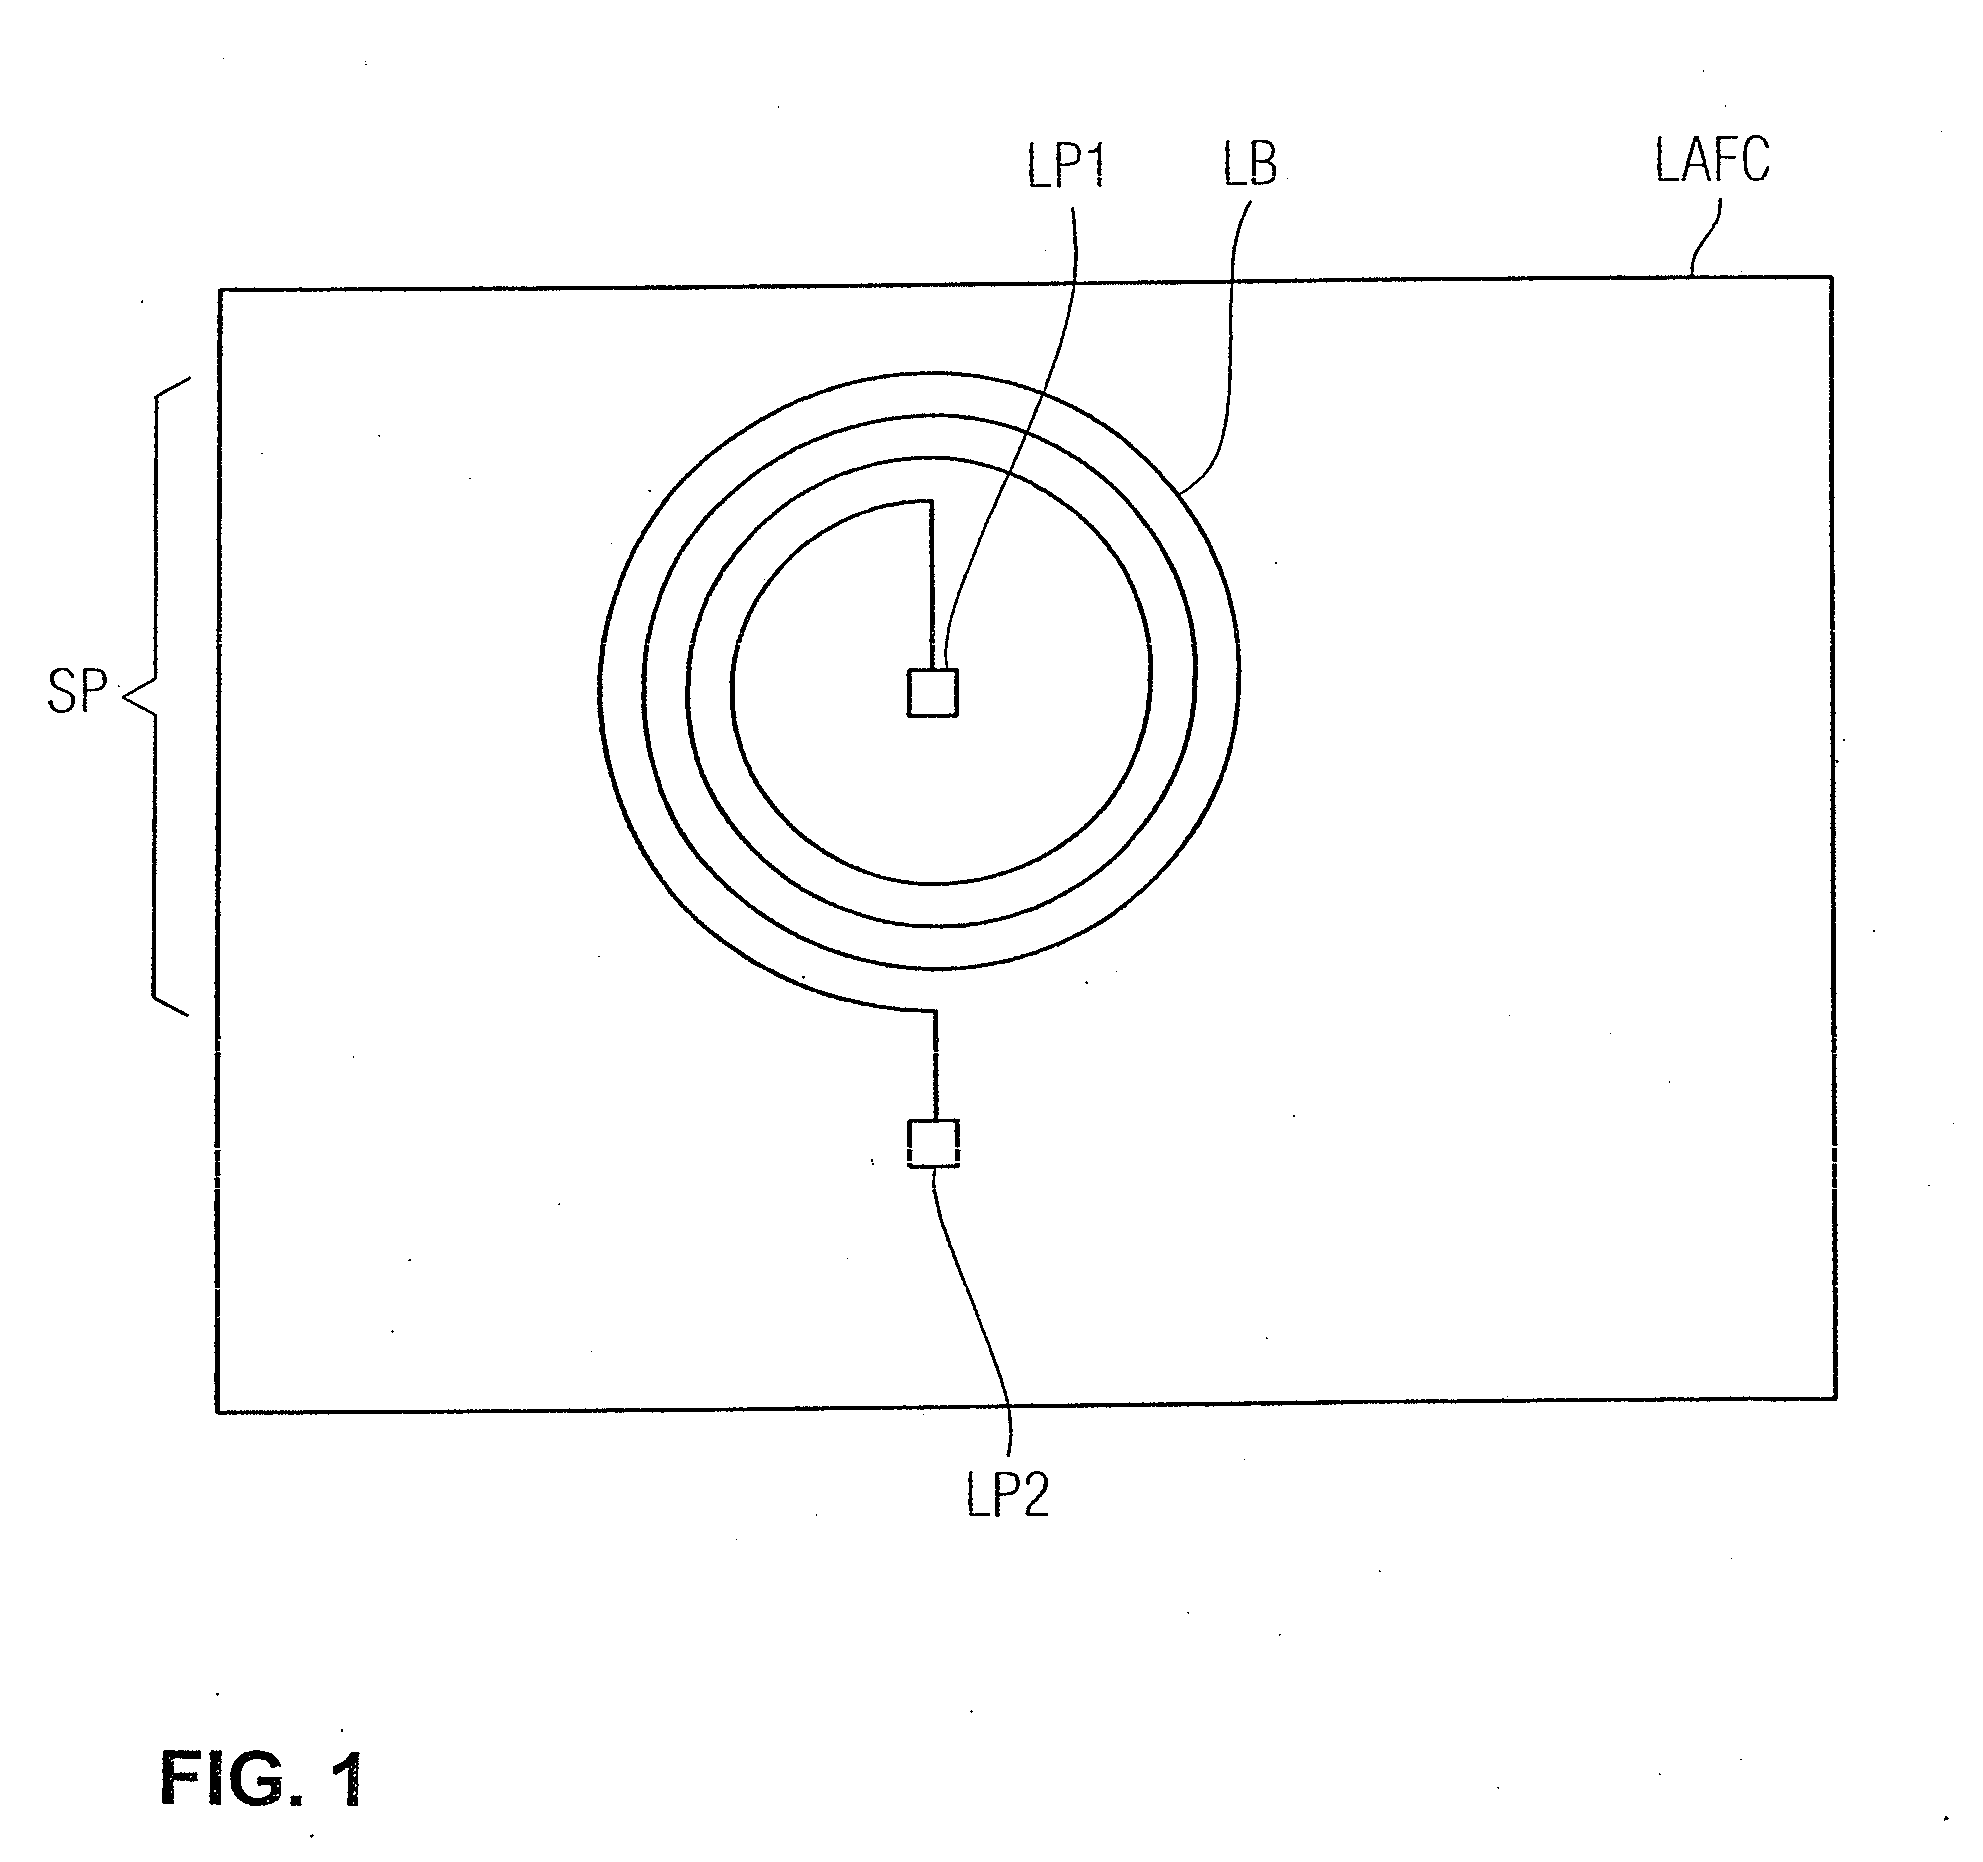 Method for Providing Inductively Coupled Radio Frequency Identification (RFID) Transponder, and RFID Transponder